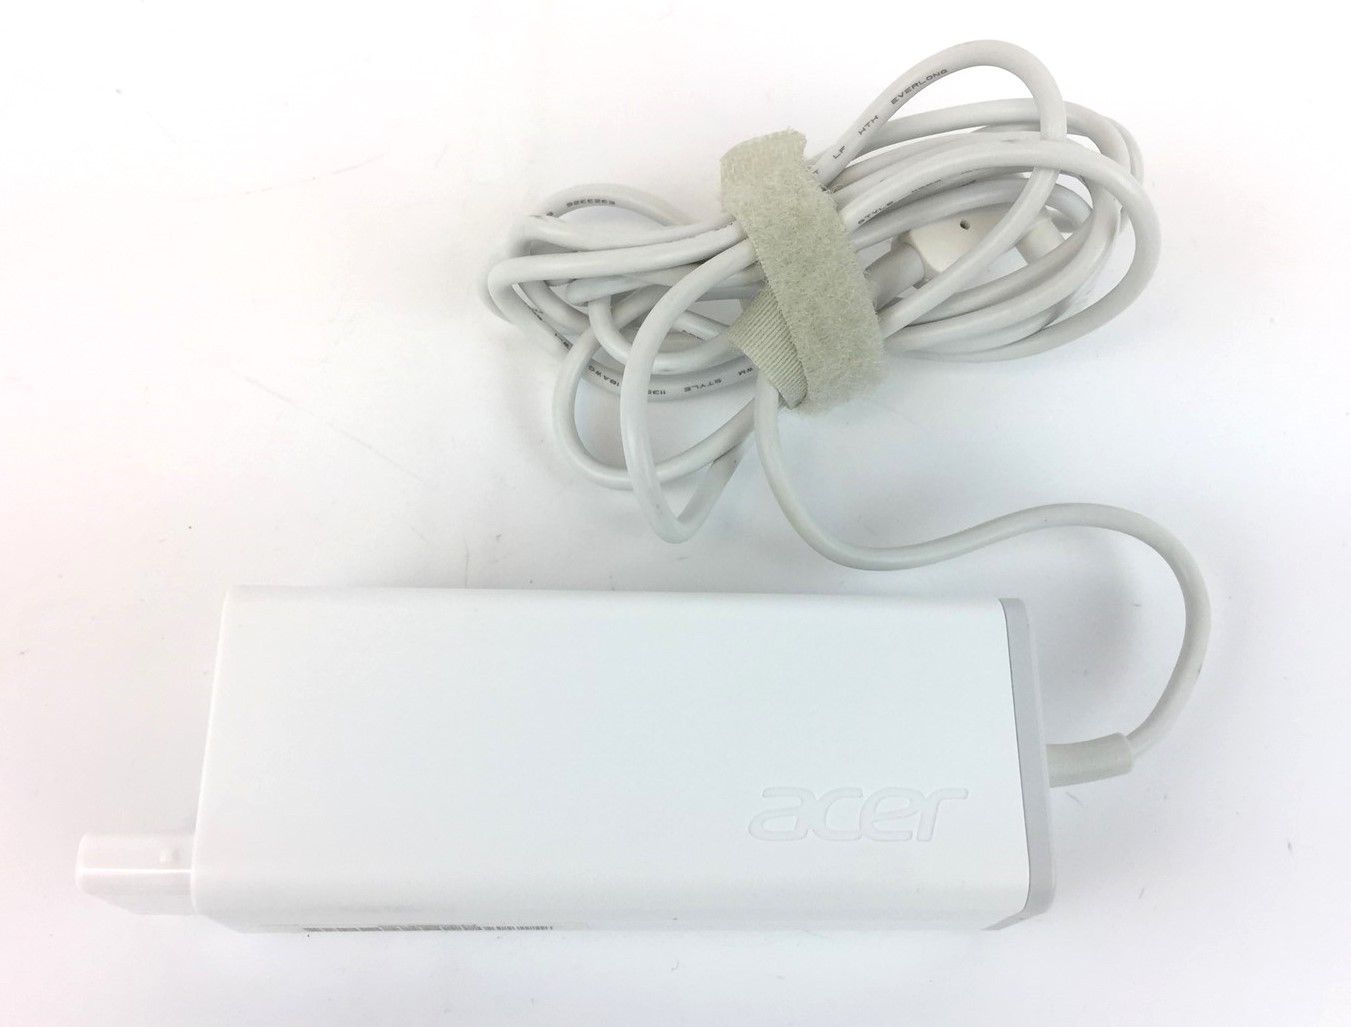 Acer Aspire S7-392 AC/DC Adapter 19V 2.37A 45W White ADP-45ZD